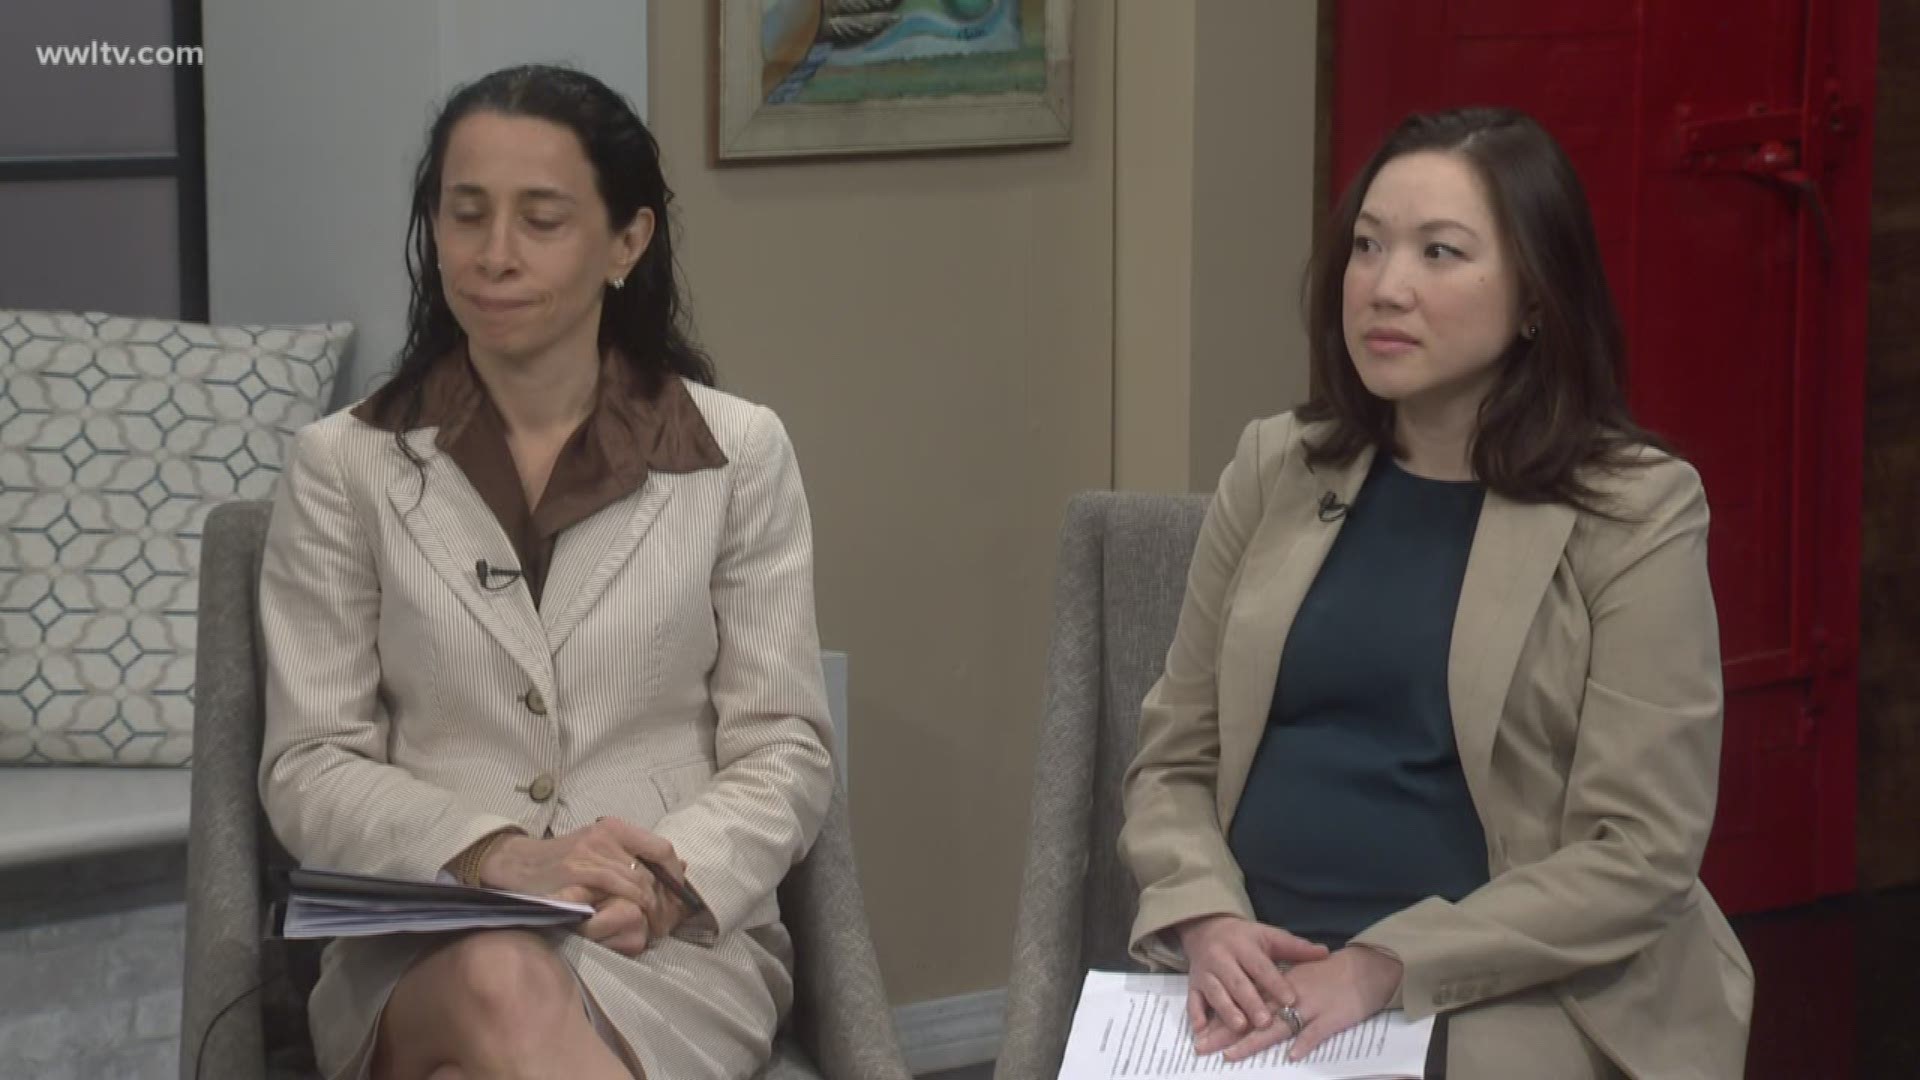 Court Watch NOLA Director Simone Levine and Deputy Director Veronica Bard is in studio to discuss their findings of corruption happening in Criminal District Court.